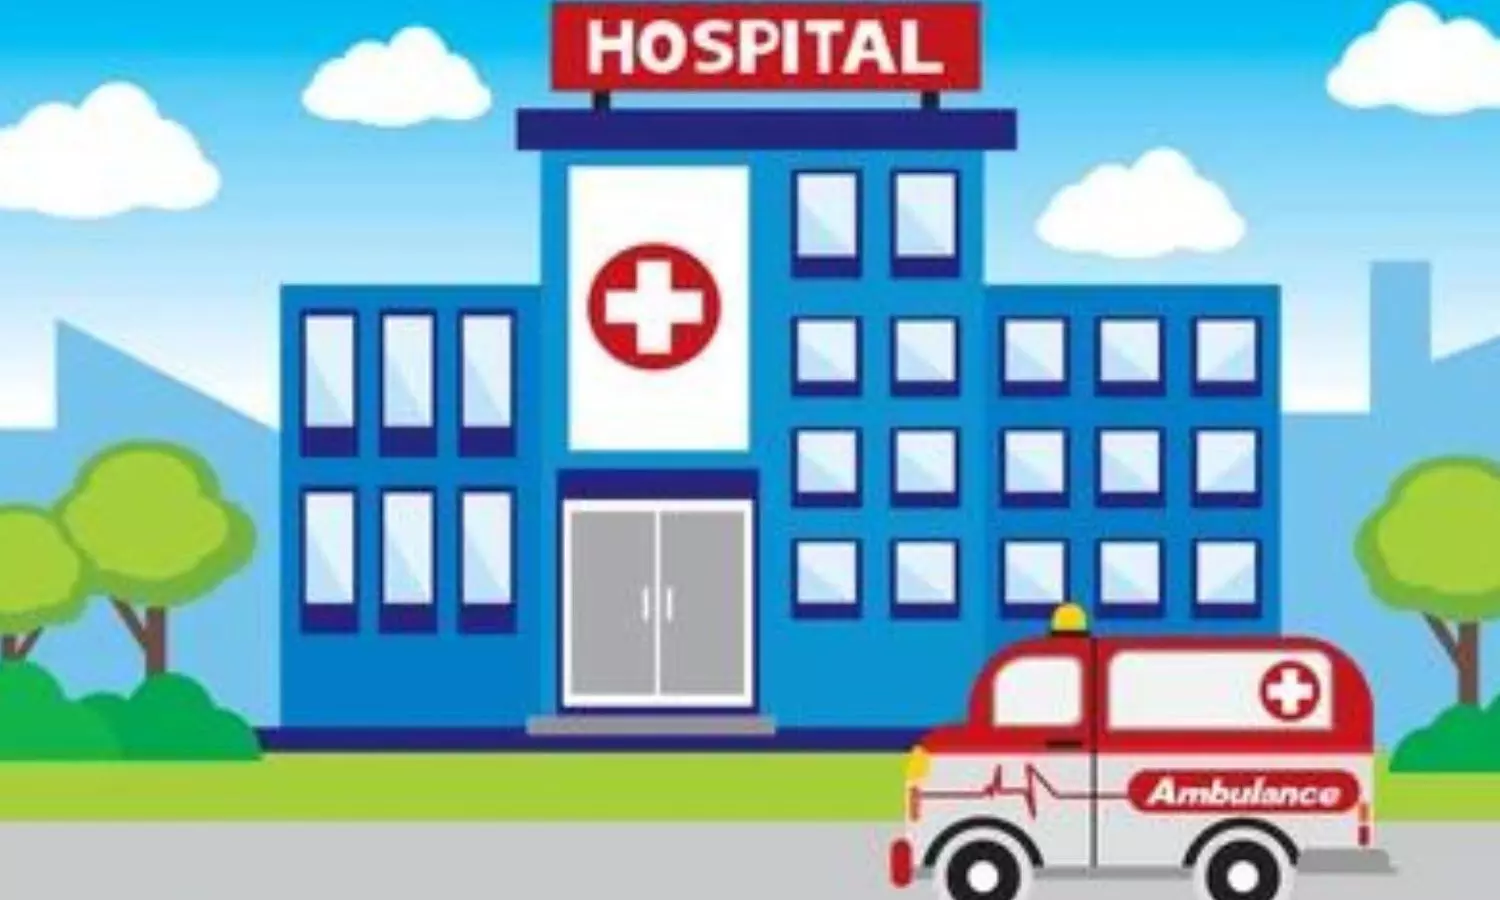 Three Govt hospitals to get makeover at cost of Rs 100 Crore in Telangana